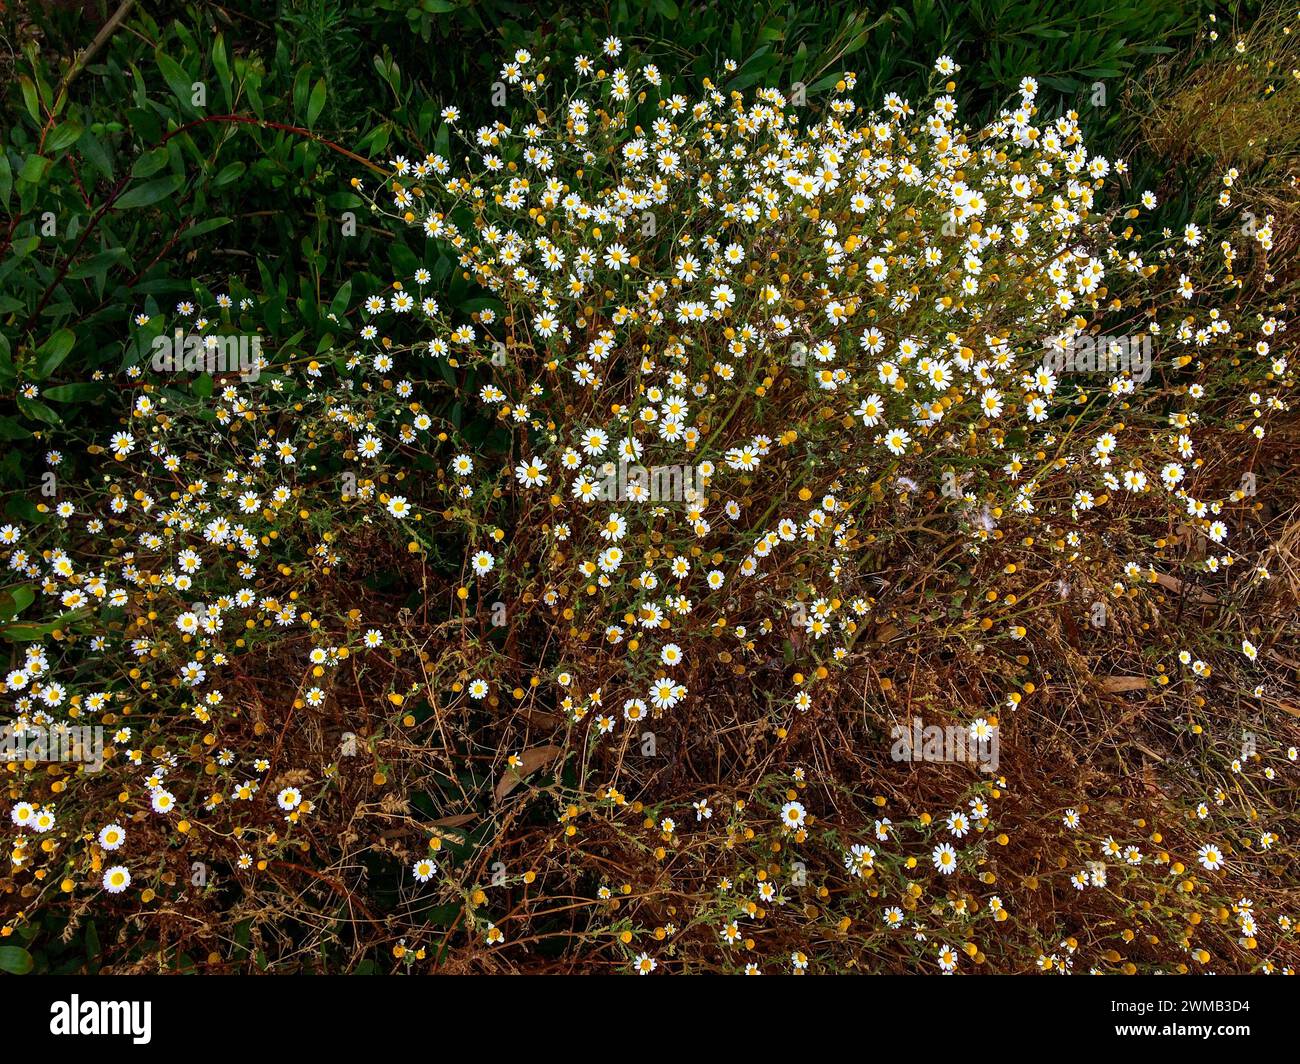 The image shows a bush with numerous small white flowers with yellow centers, surrounded by green and brown foliage. Stock Photo